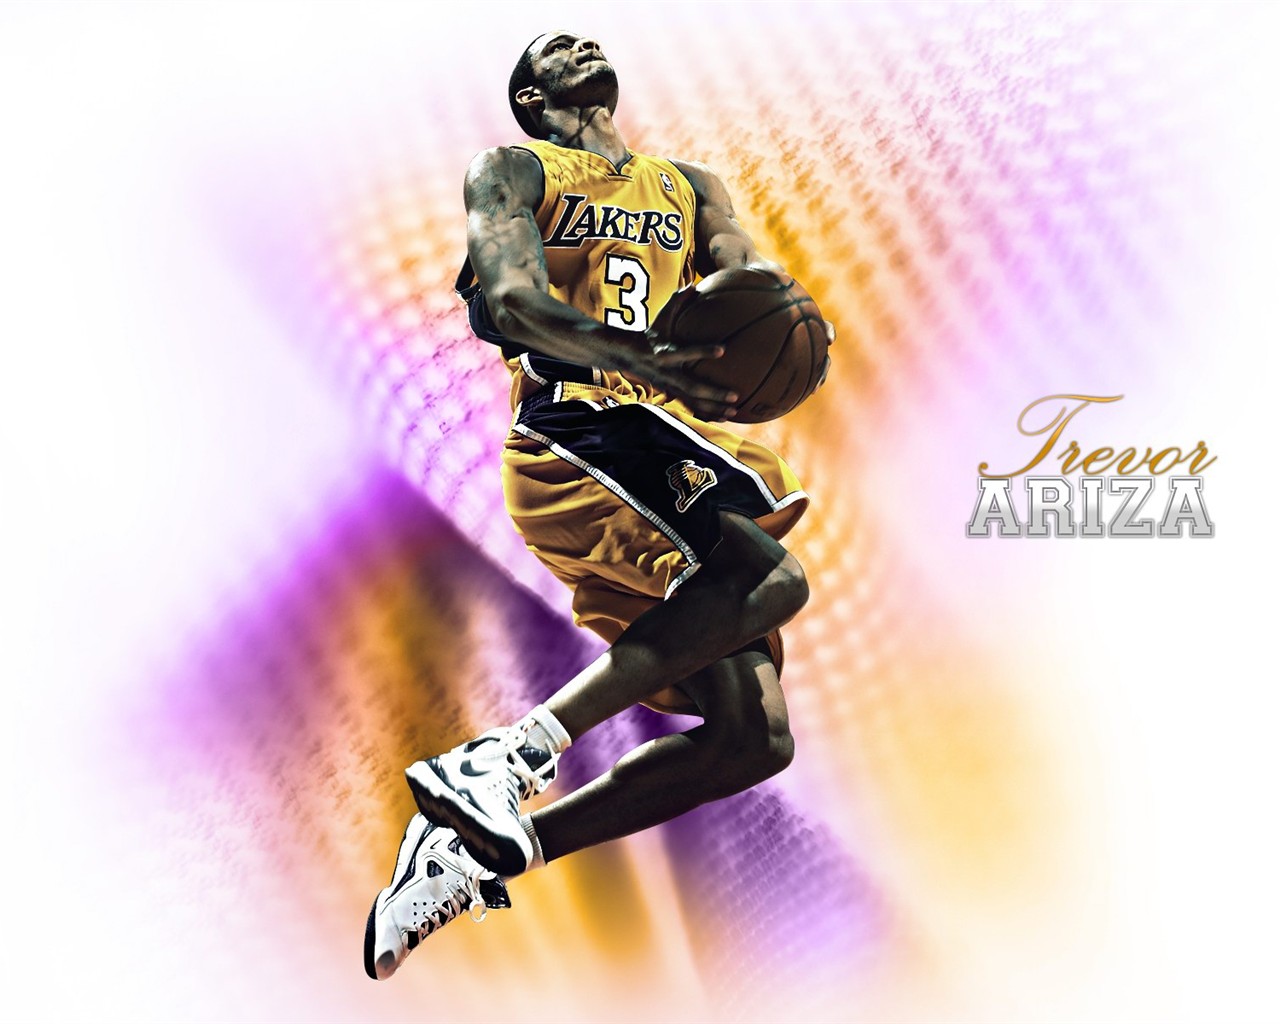 Los Angeles Lakers Wallpaper Oficial #27 - 1280x1024